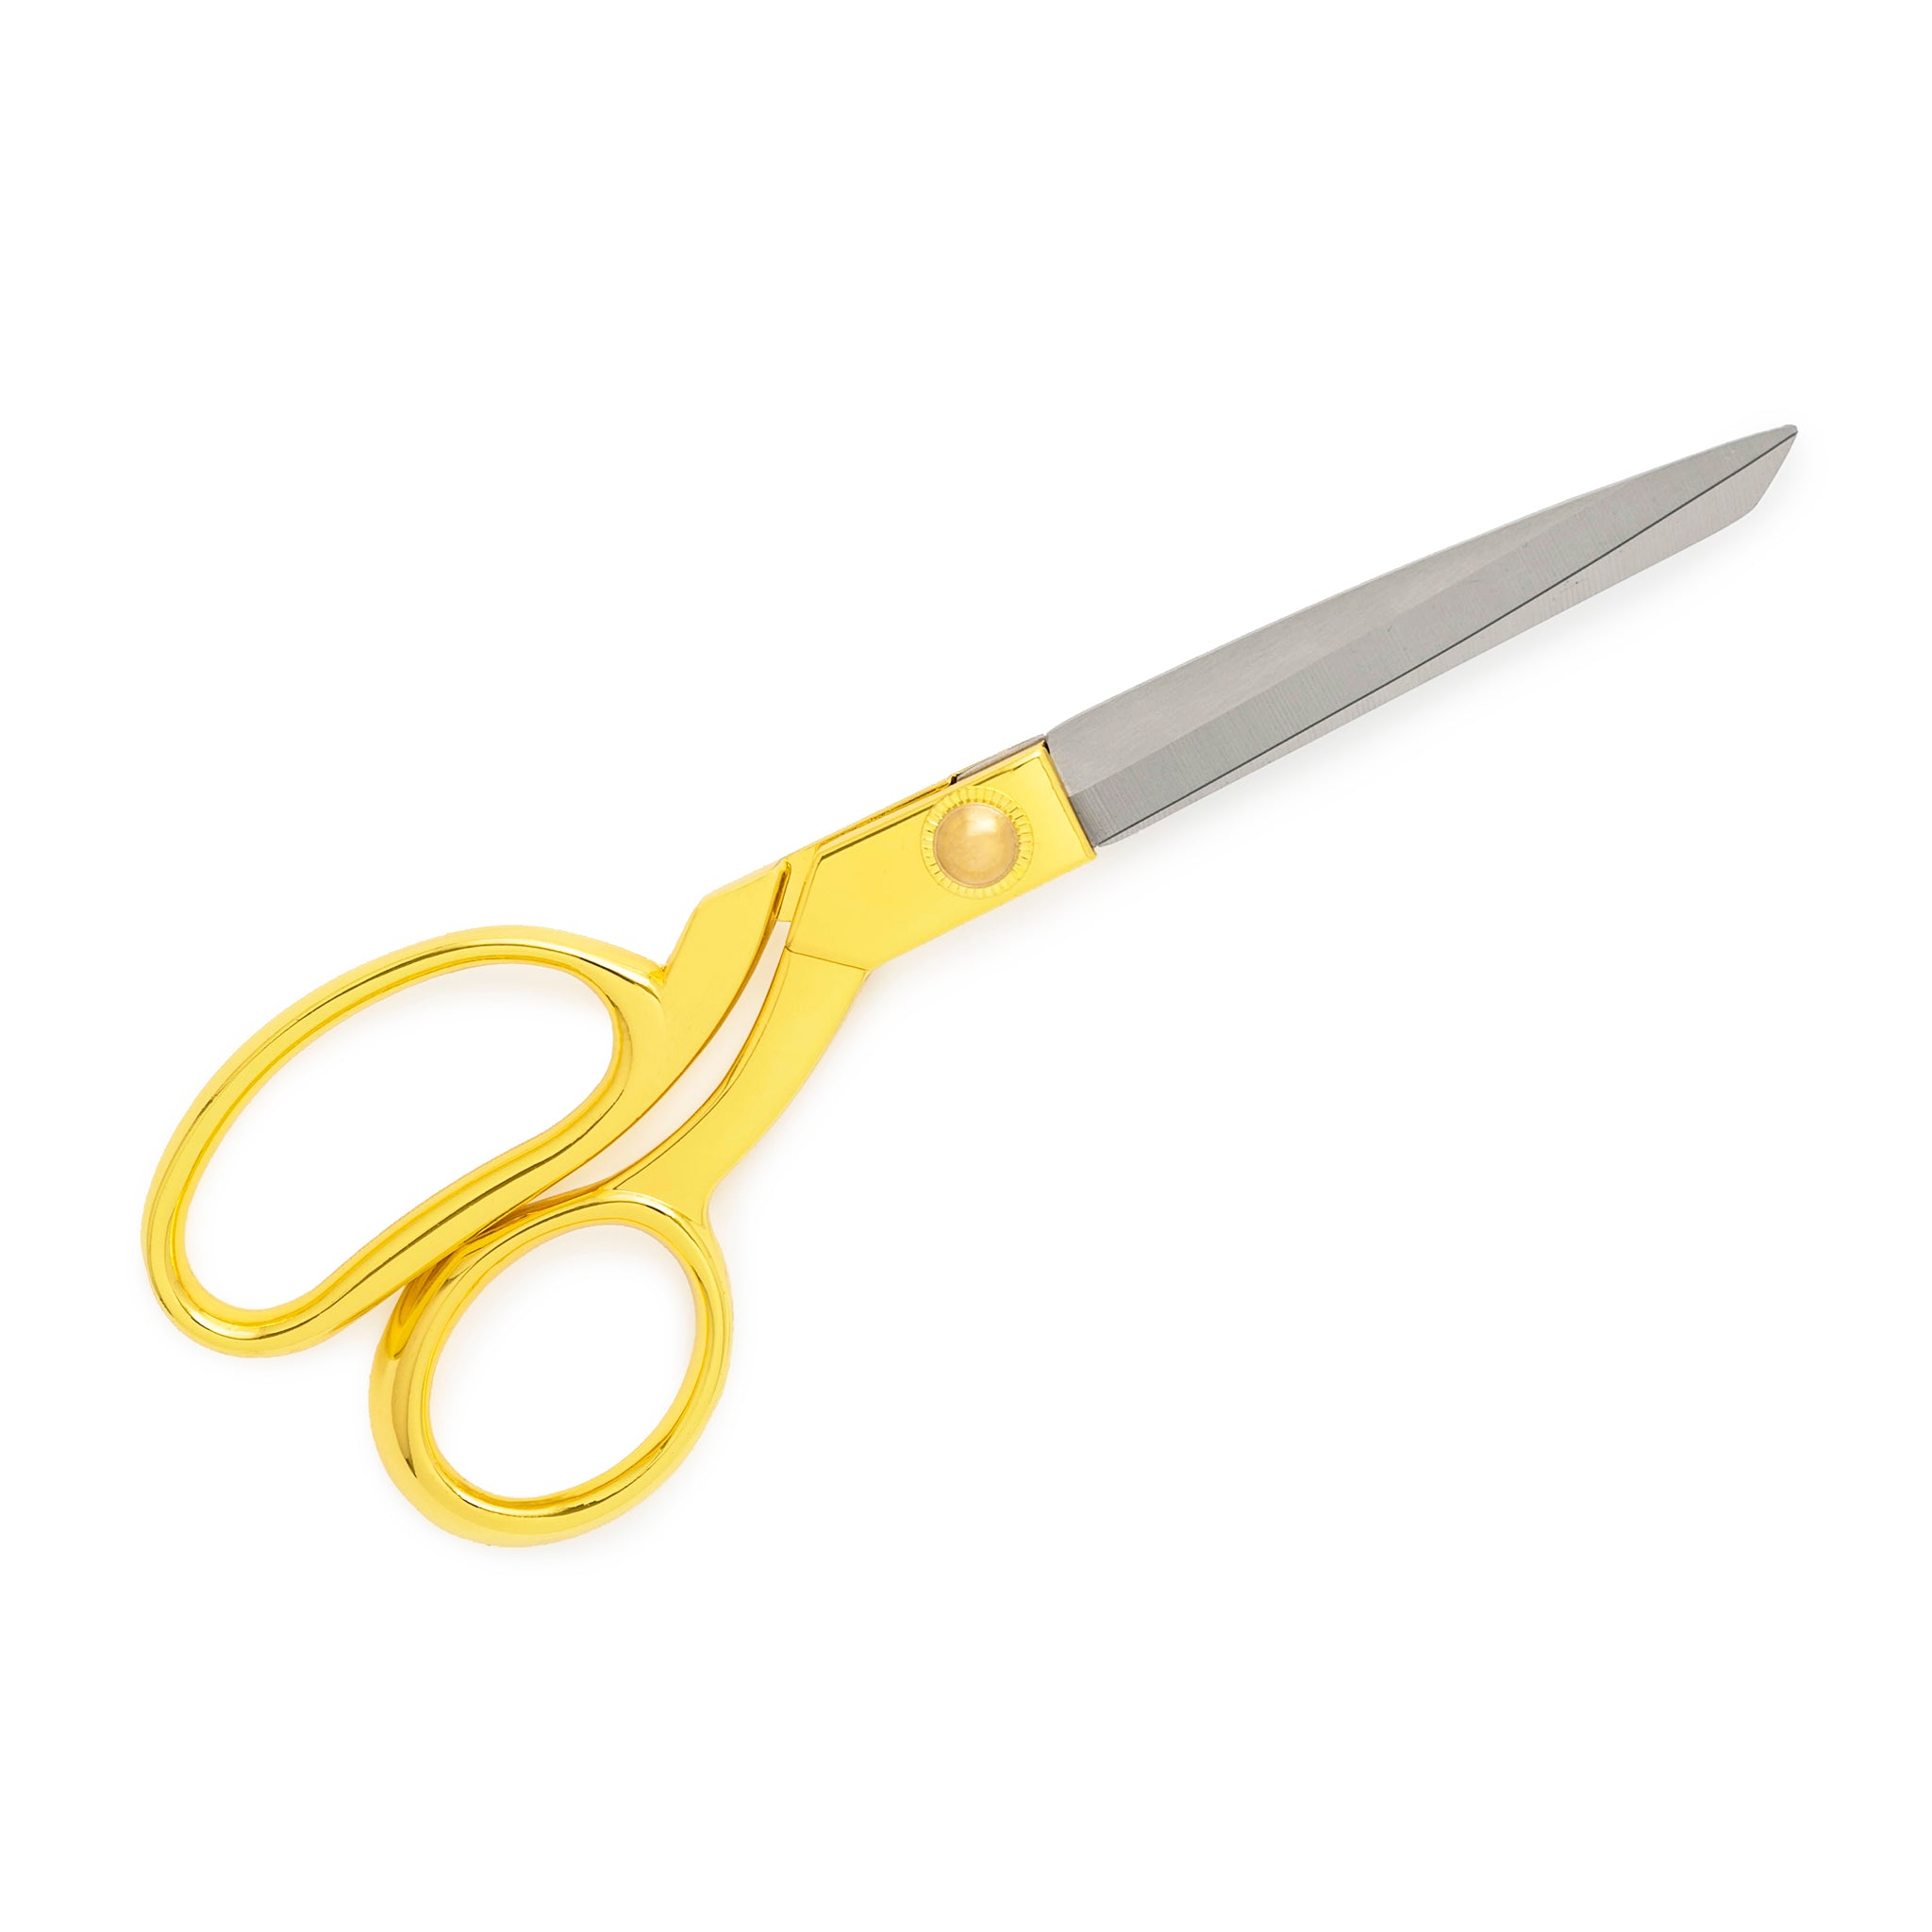 Wholesale Golden Gold Office Scissors Set With Pen Holder Ideal For  Tailoring, Fabric Paper Cutting, And Crafts P15F 230628 From Lian10, $10.18